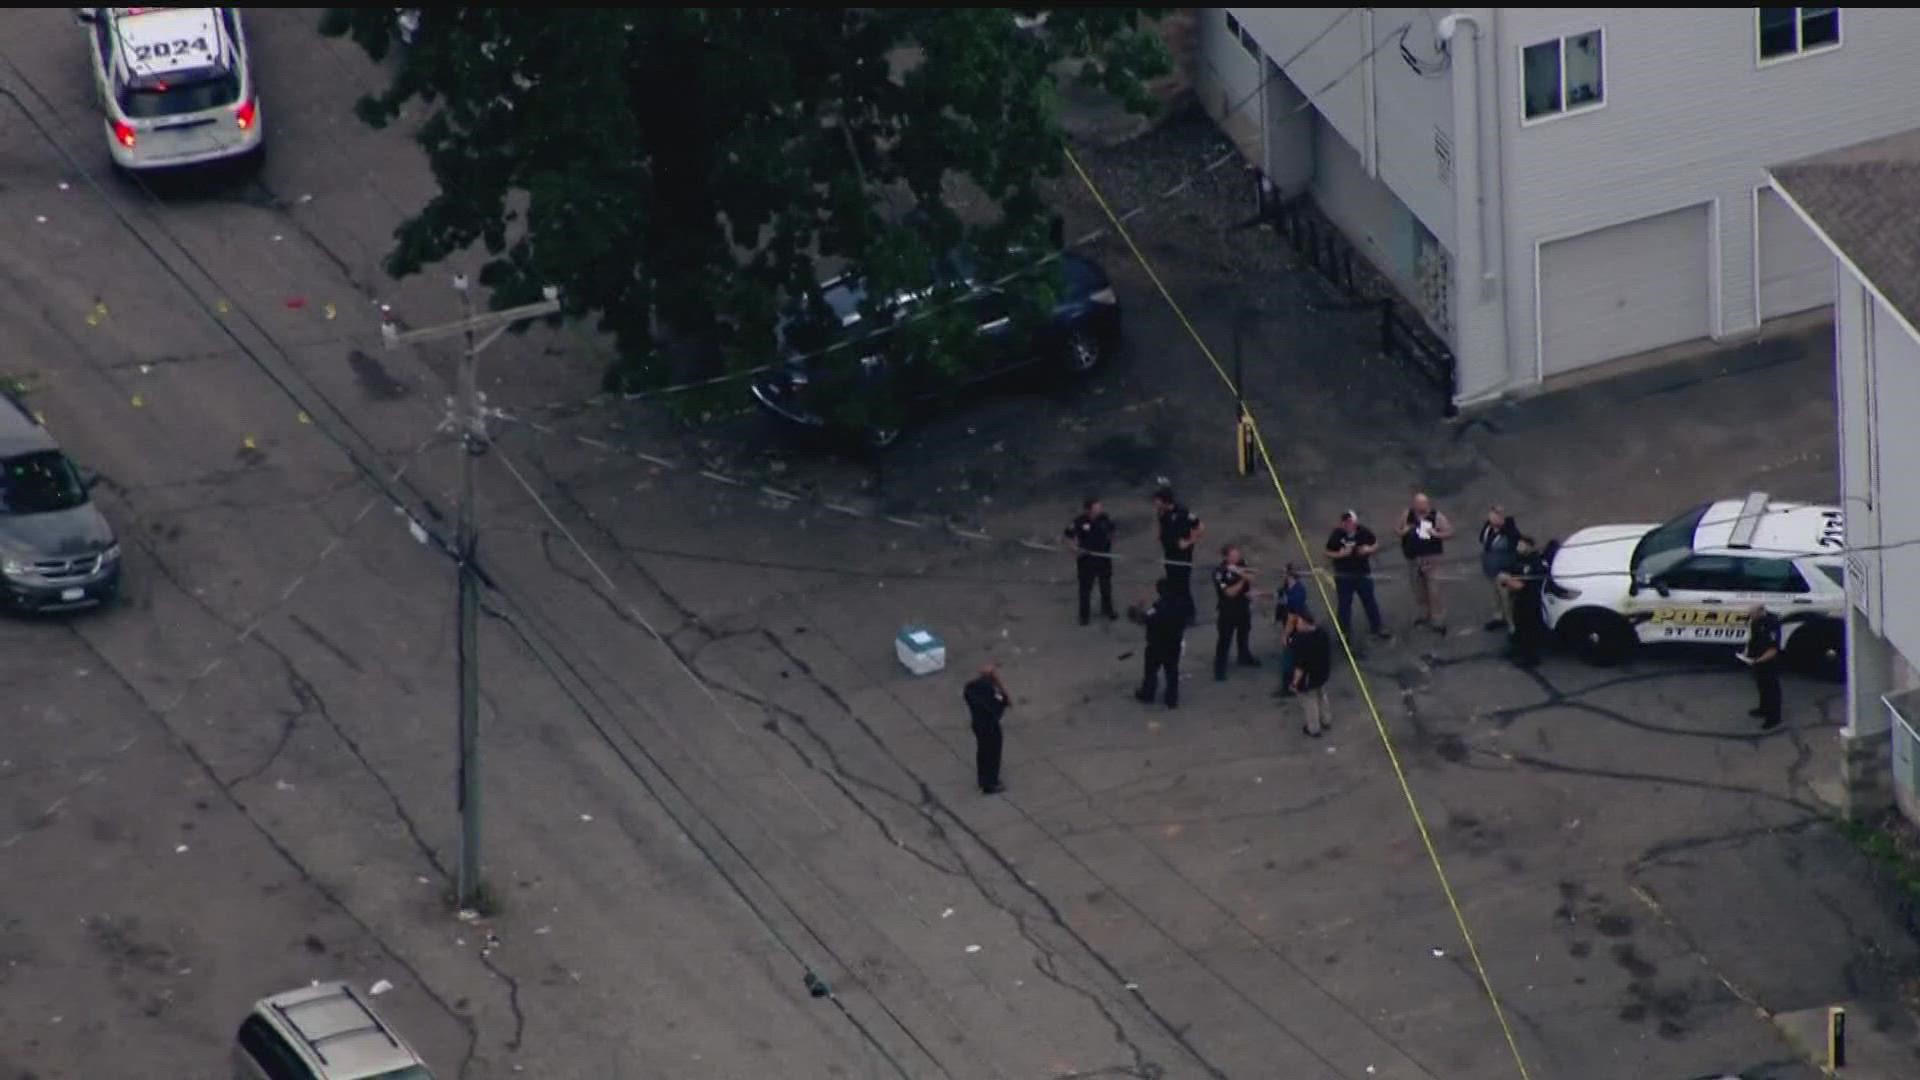 Four people were shot late Wednesday afternoon in an alleyway, after police say a fight escalated between two groups.